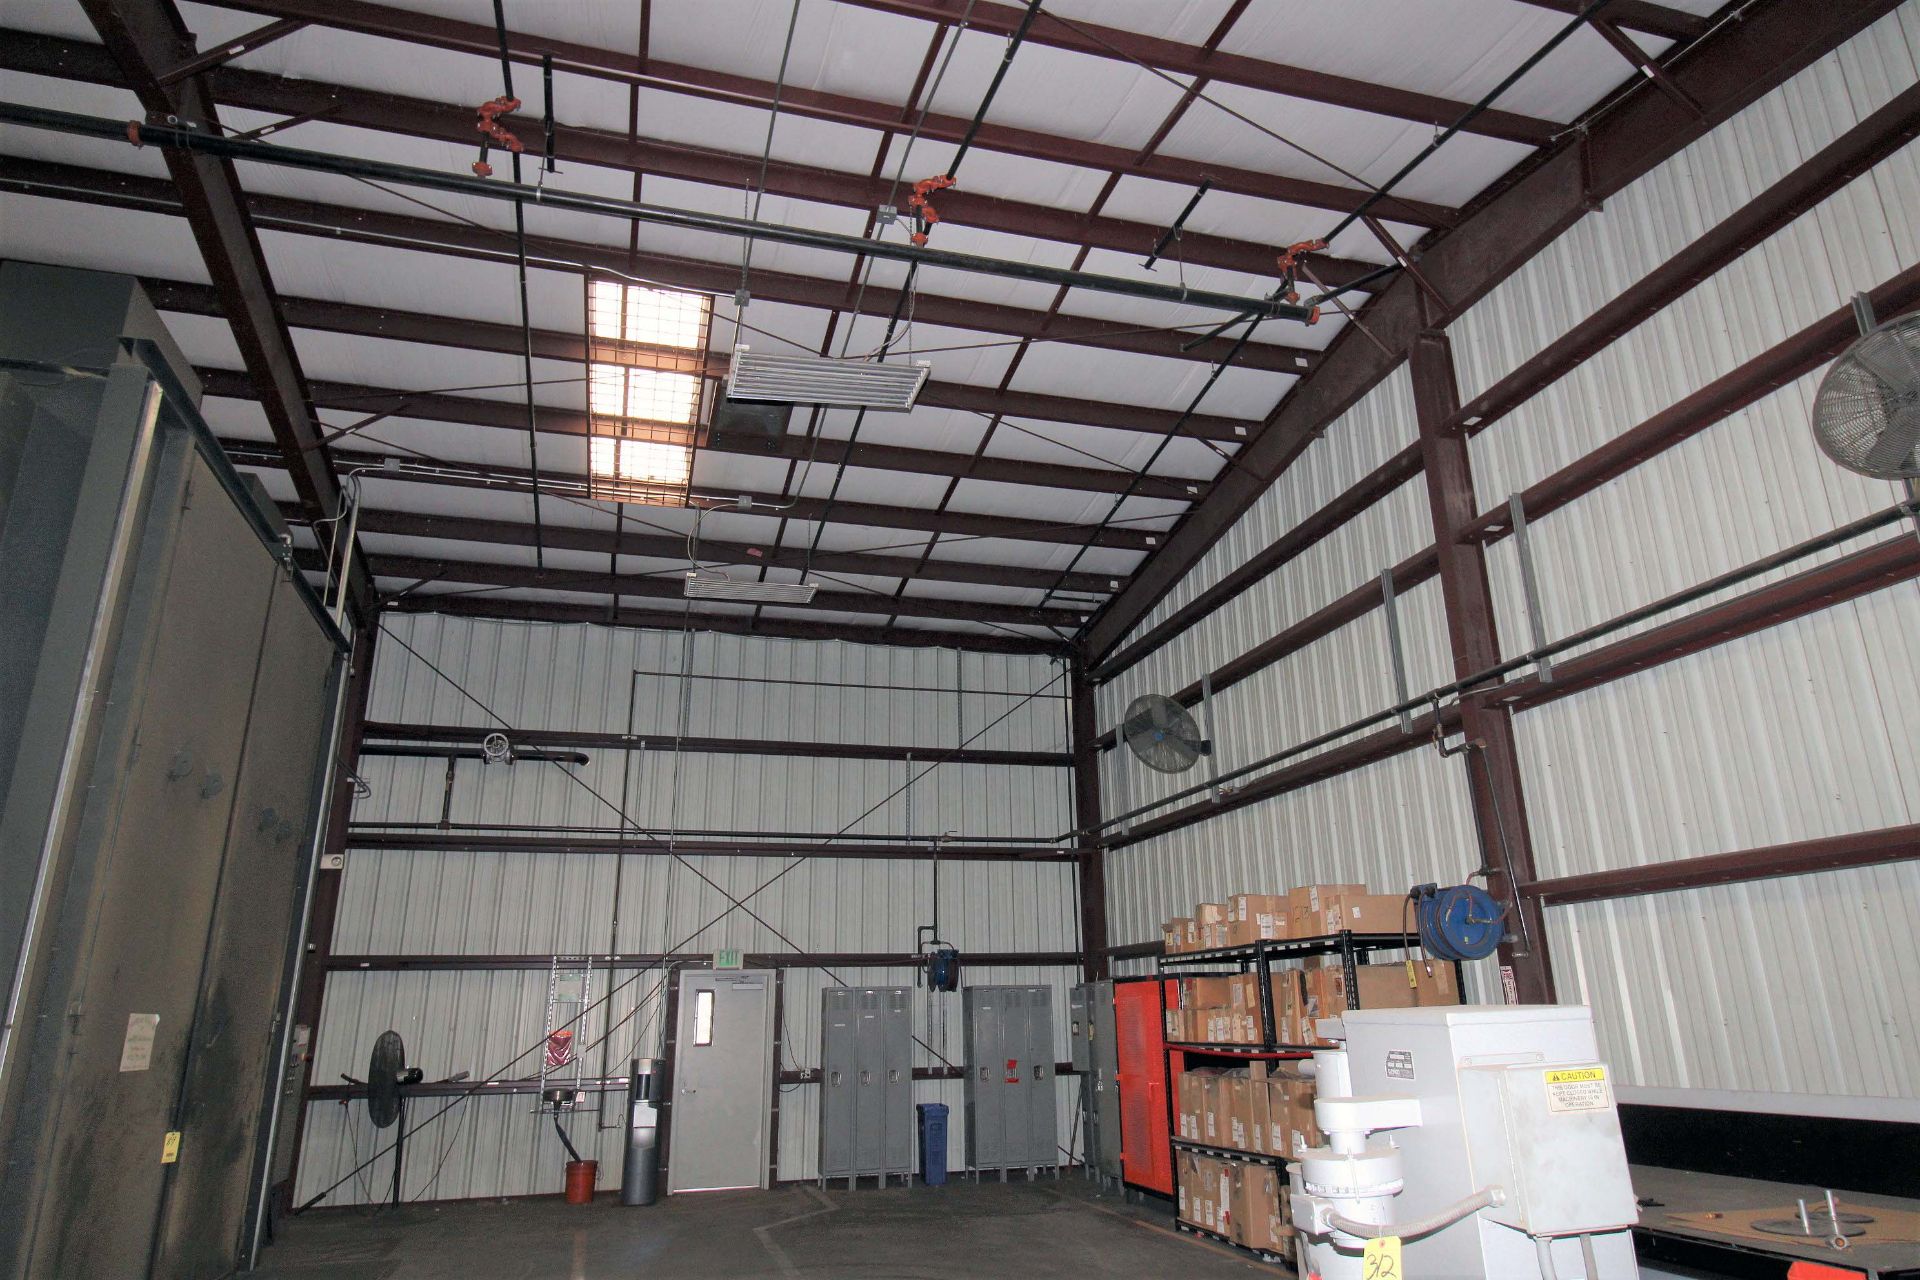 FREE STANDING METAL BUILDING, 48’W. X 78’L. X 20’ EAVE HT. INTERIOR DIMS., building constructed - Image 5 of 9